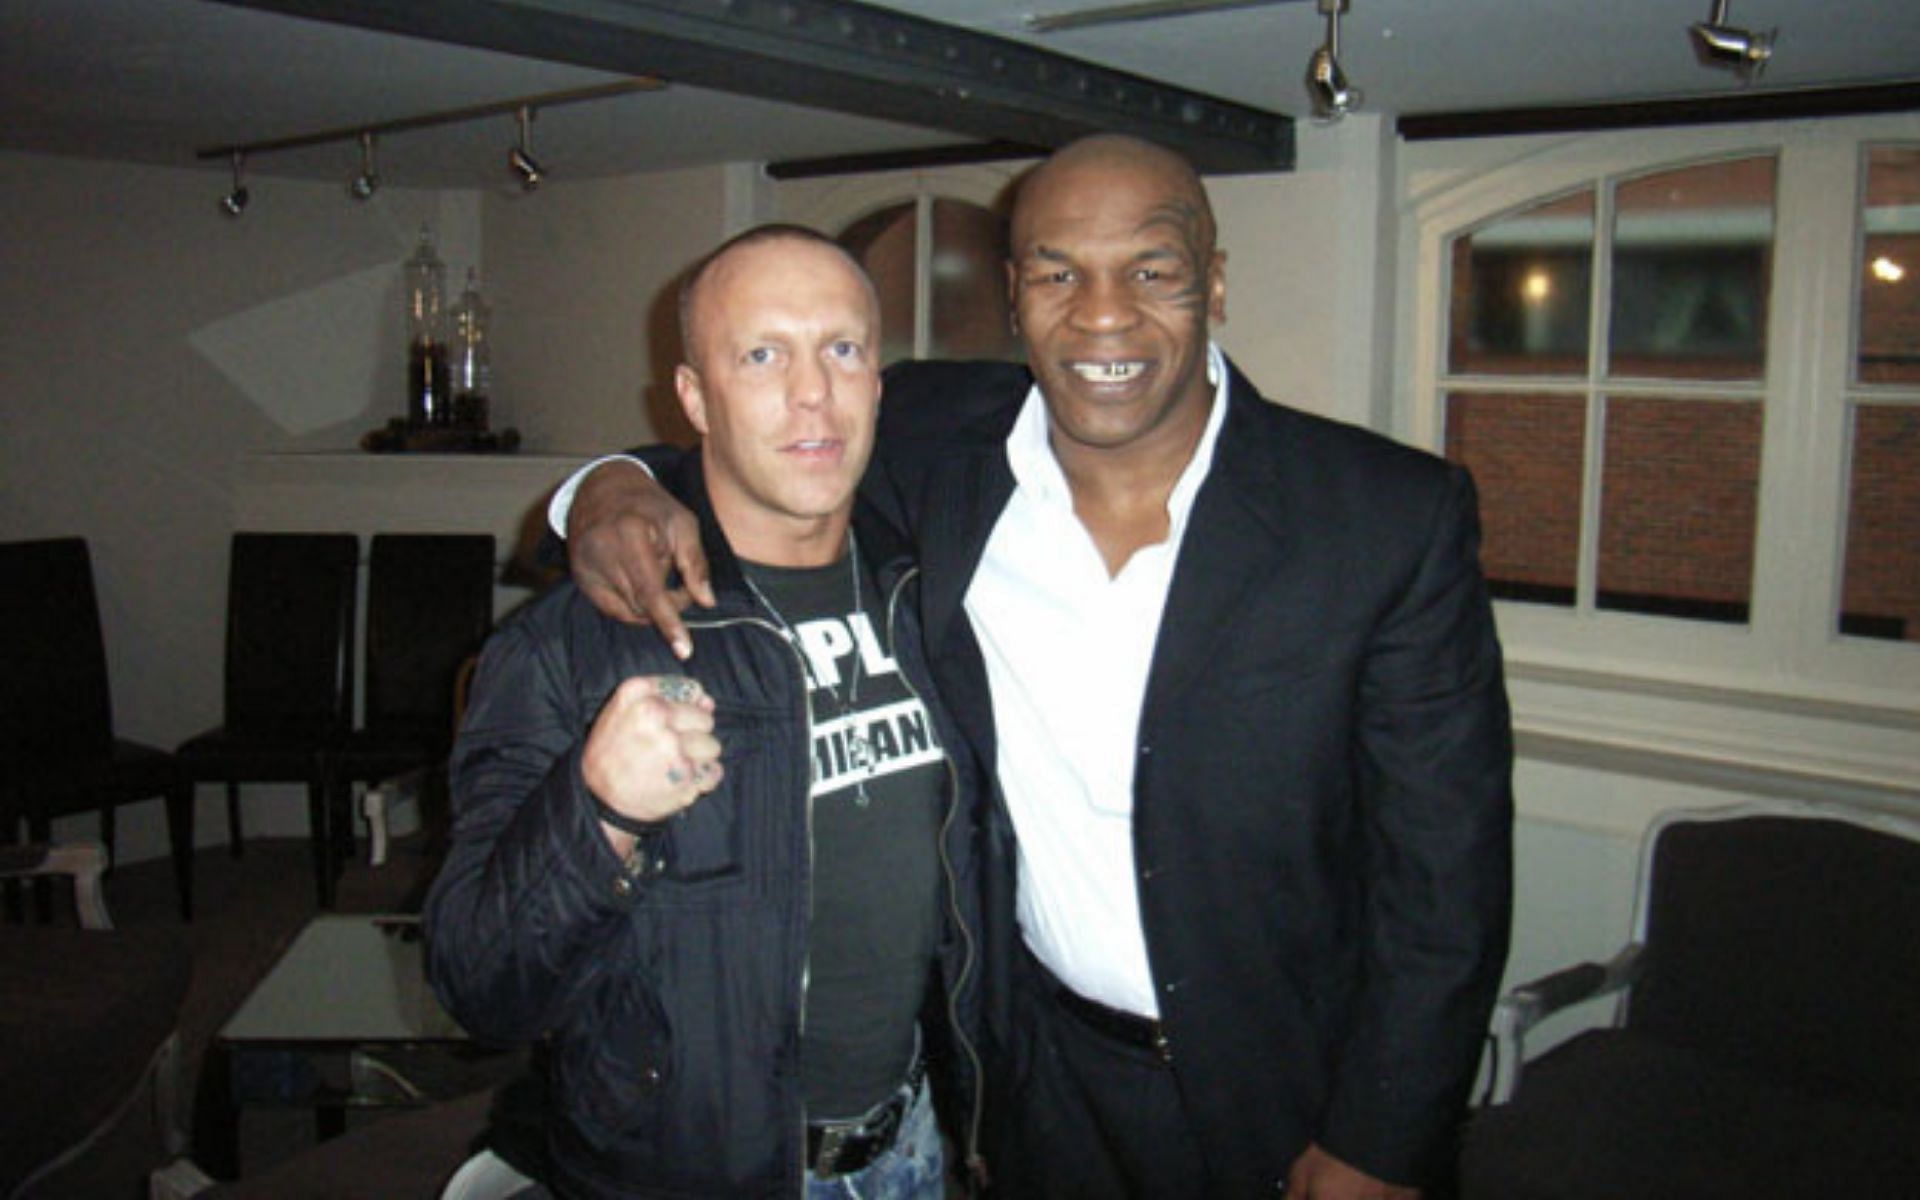 Ramon Dekkers (left) along with Mike Tyson (right) [Image via. The AX Forum]